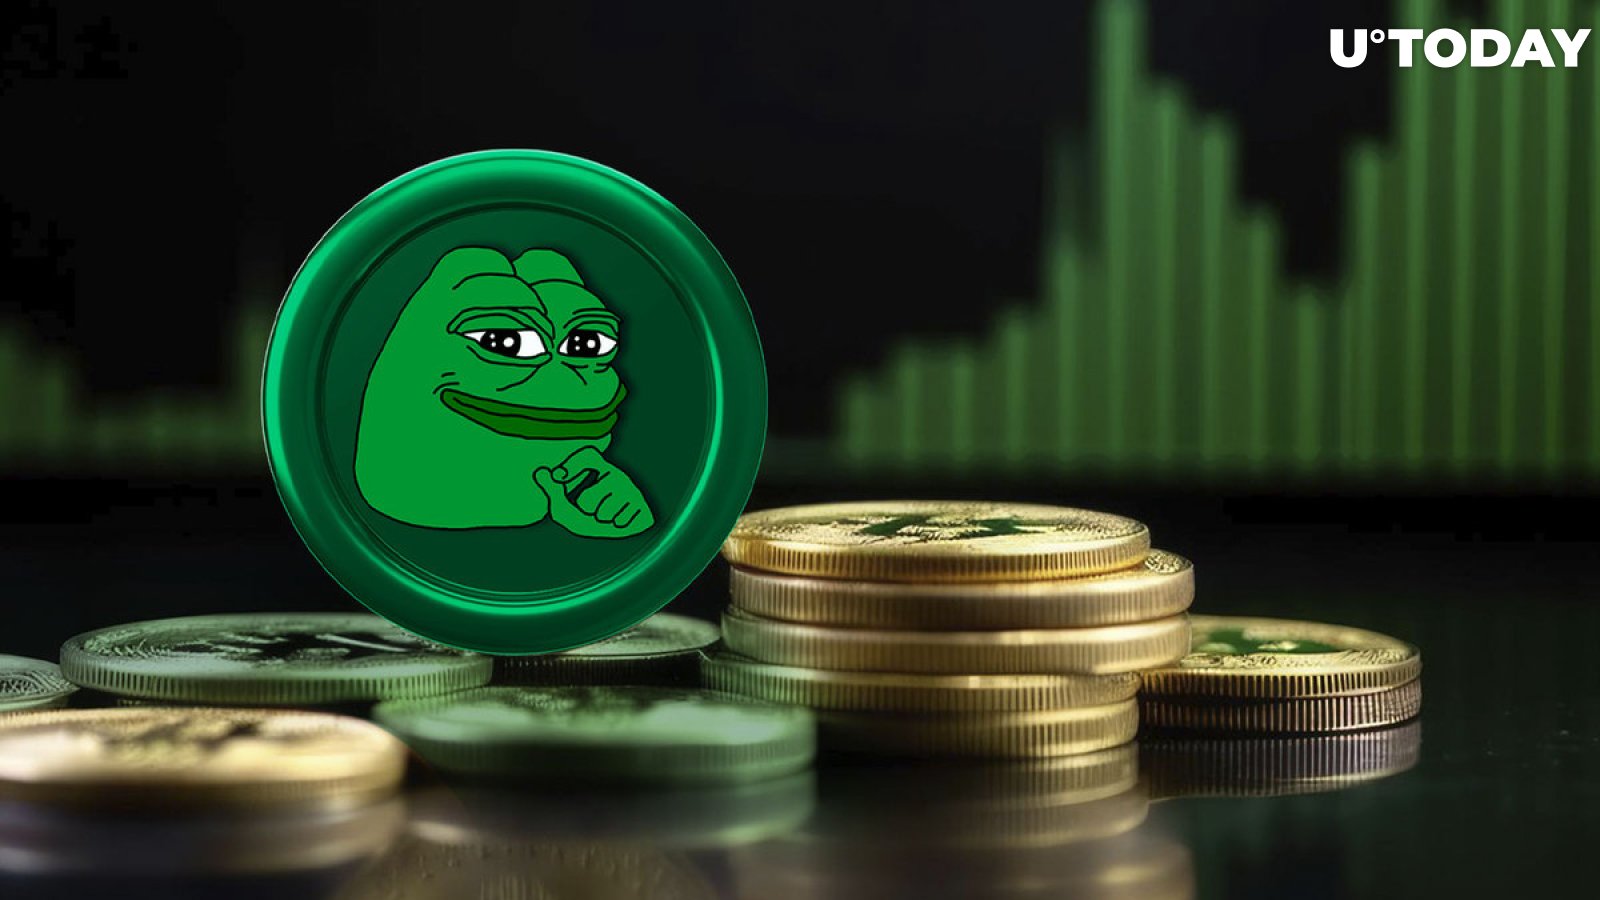 PEPE Soars 300% in Volume Amid Epic New ATH Rise